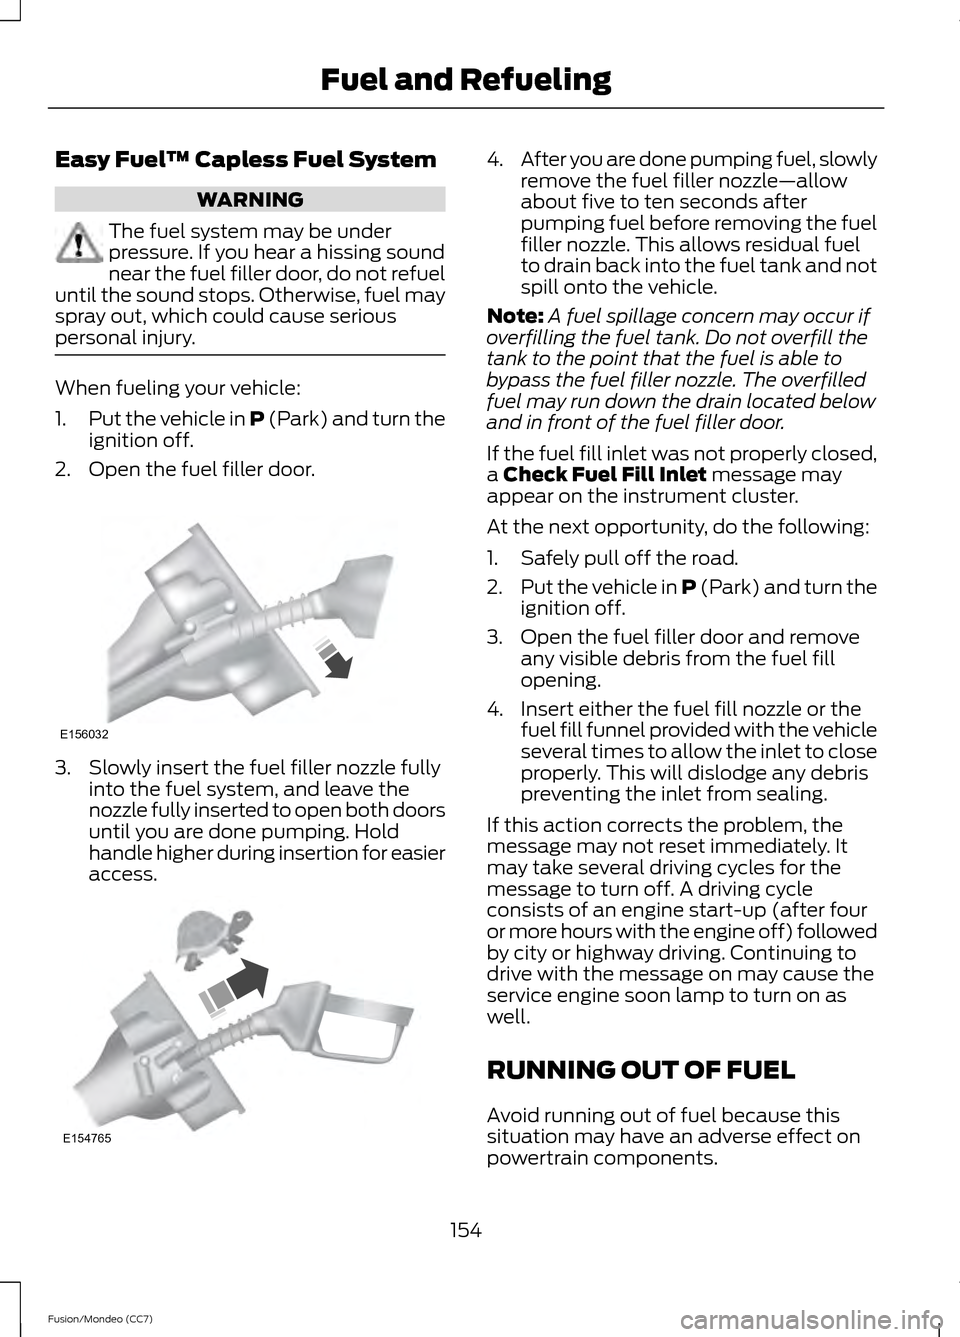 FORD FUSION (AMERICAS) 2013 2.G User Guide Easy Fuel
™ Capless Fuel System WARNING
The fuel system may be under
pressure. If you hear a hissing sound
near the fuel filler door, do not refuel
until the sound stops. Otherwise, fuel may
spray o